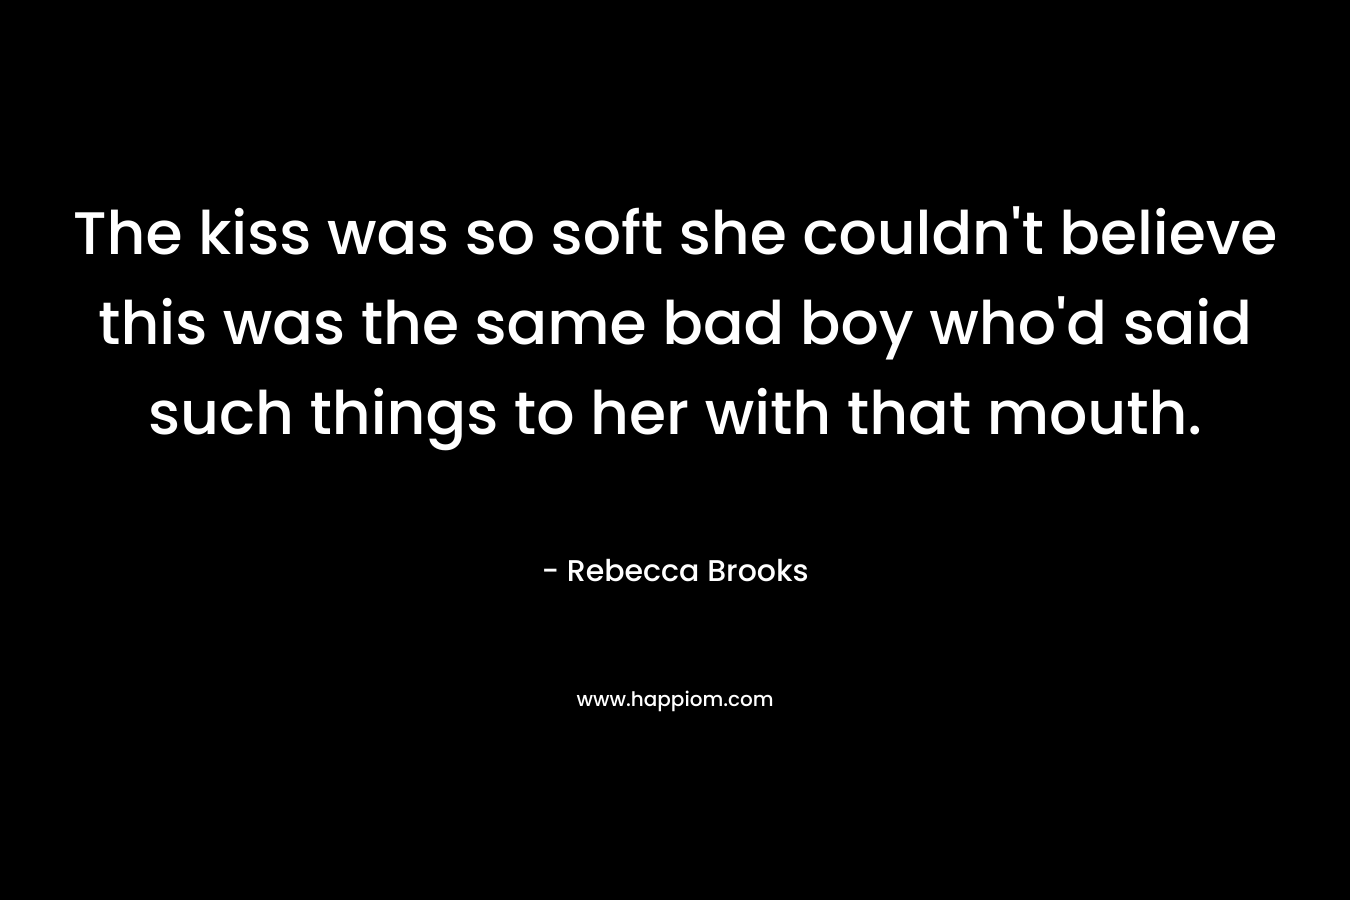 The kiss was so soft she couldn’t believe this was the same bad boy who’d said such things to her with that mouth. – Rebecca Brooks